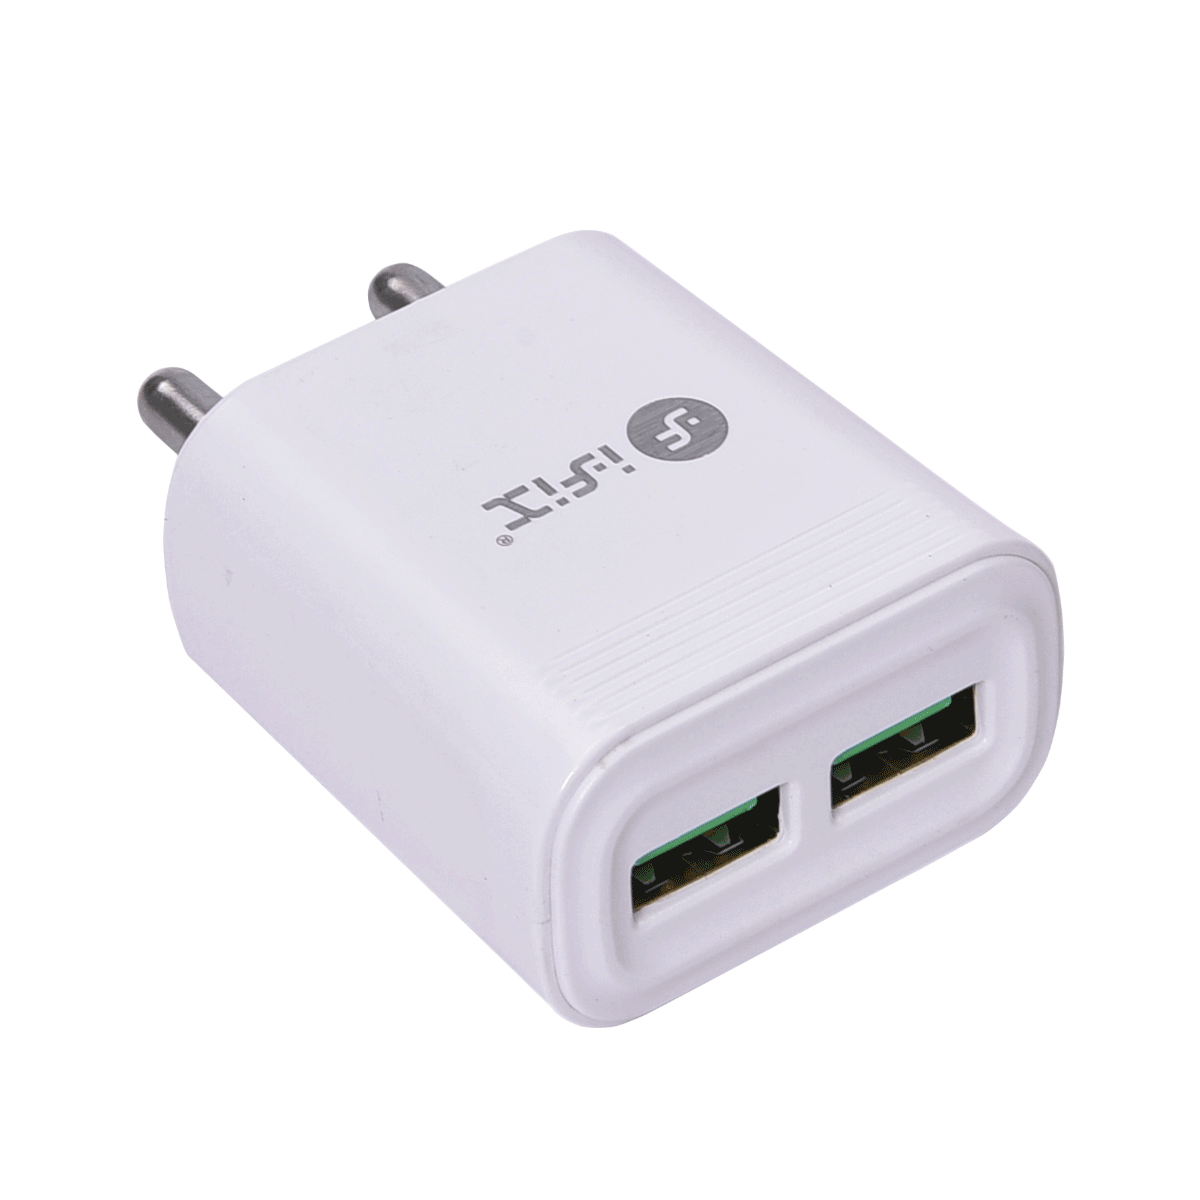 IF-07 Dual USB Port Type-C 2.4A Fast charger